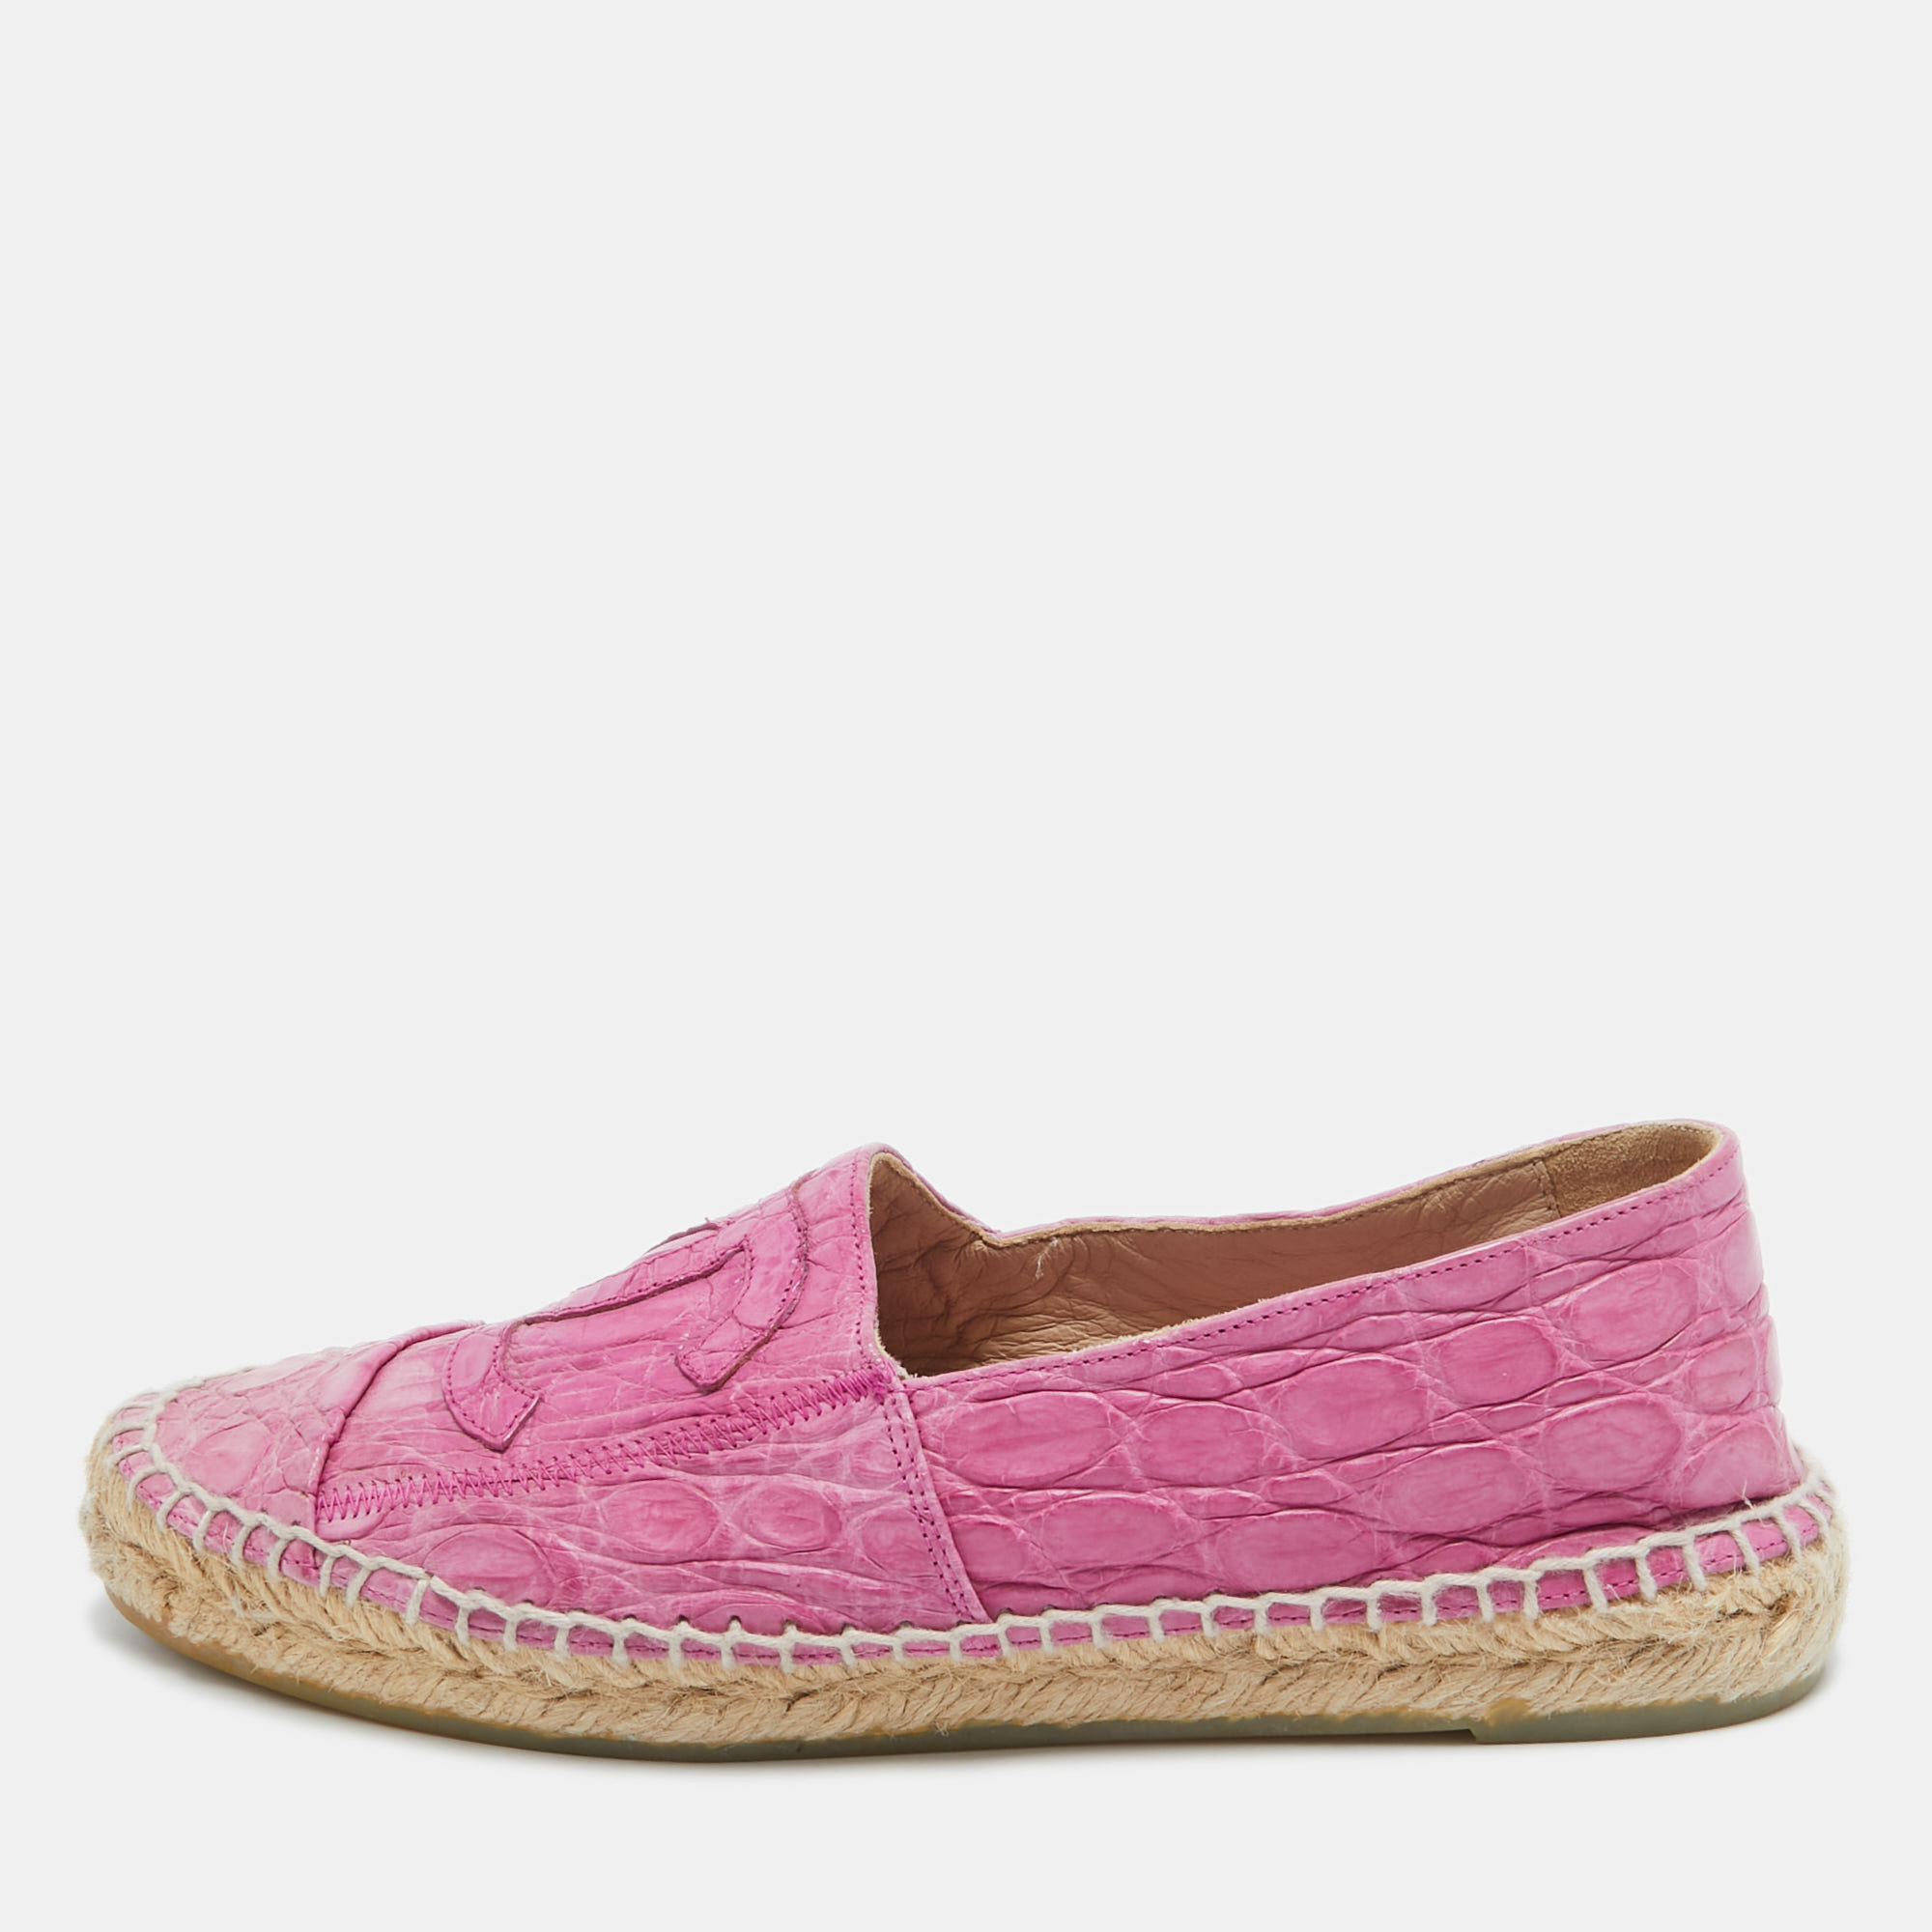 Pre-owned Chanel Pink Crocodile Cc Espadrille Flats Size 38